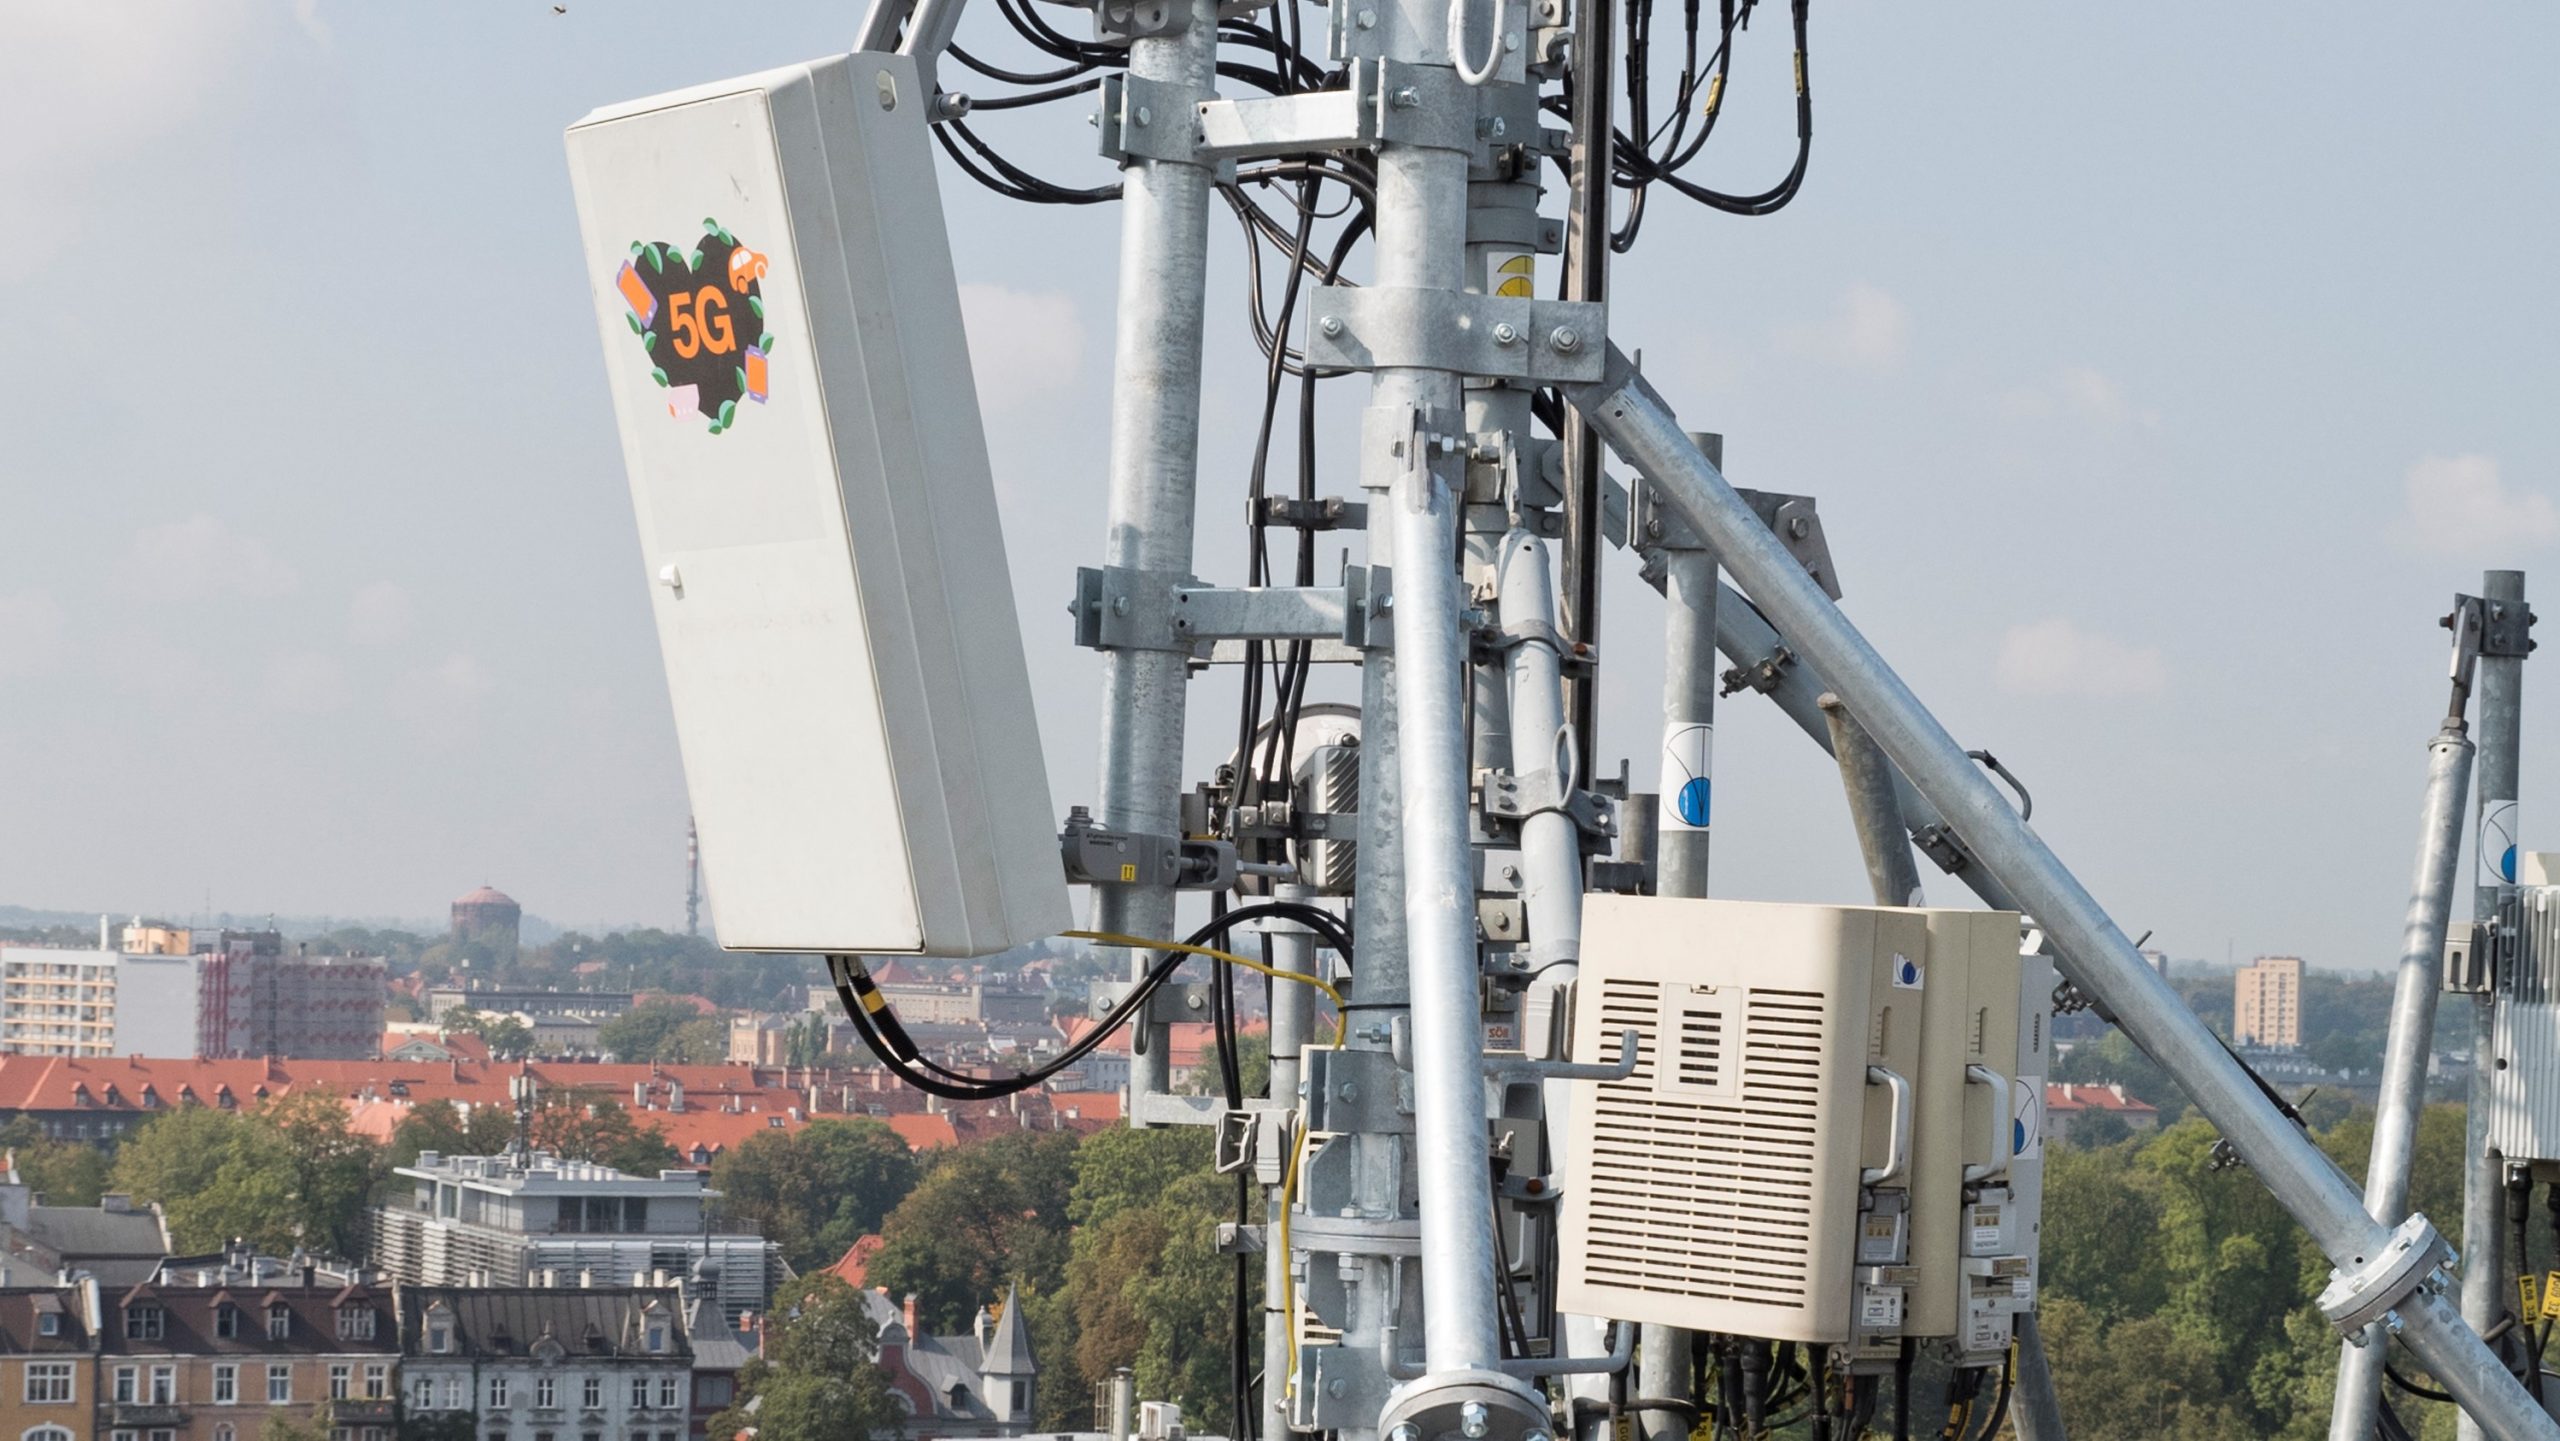 Orange and Huawei Team Up To Test Out 5G in Gliwice